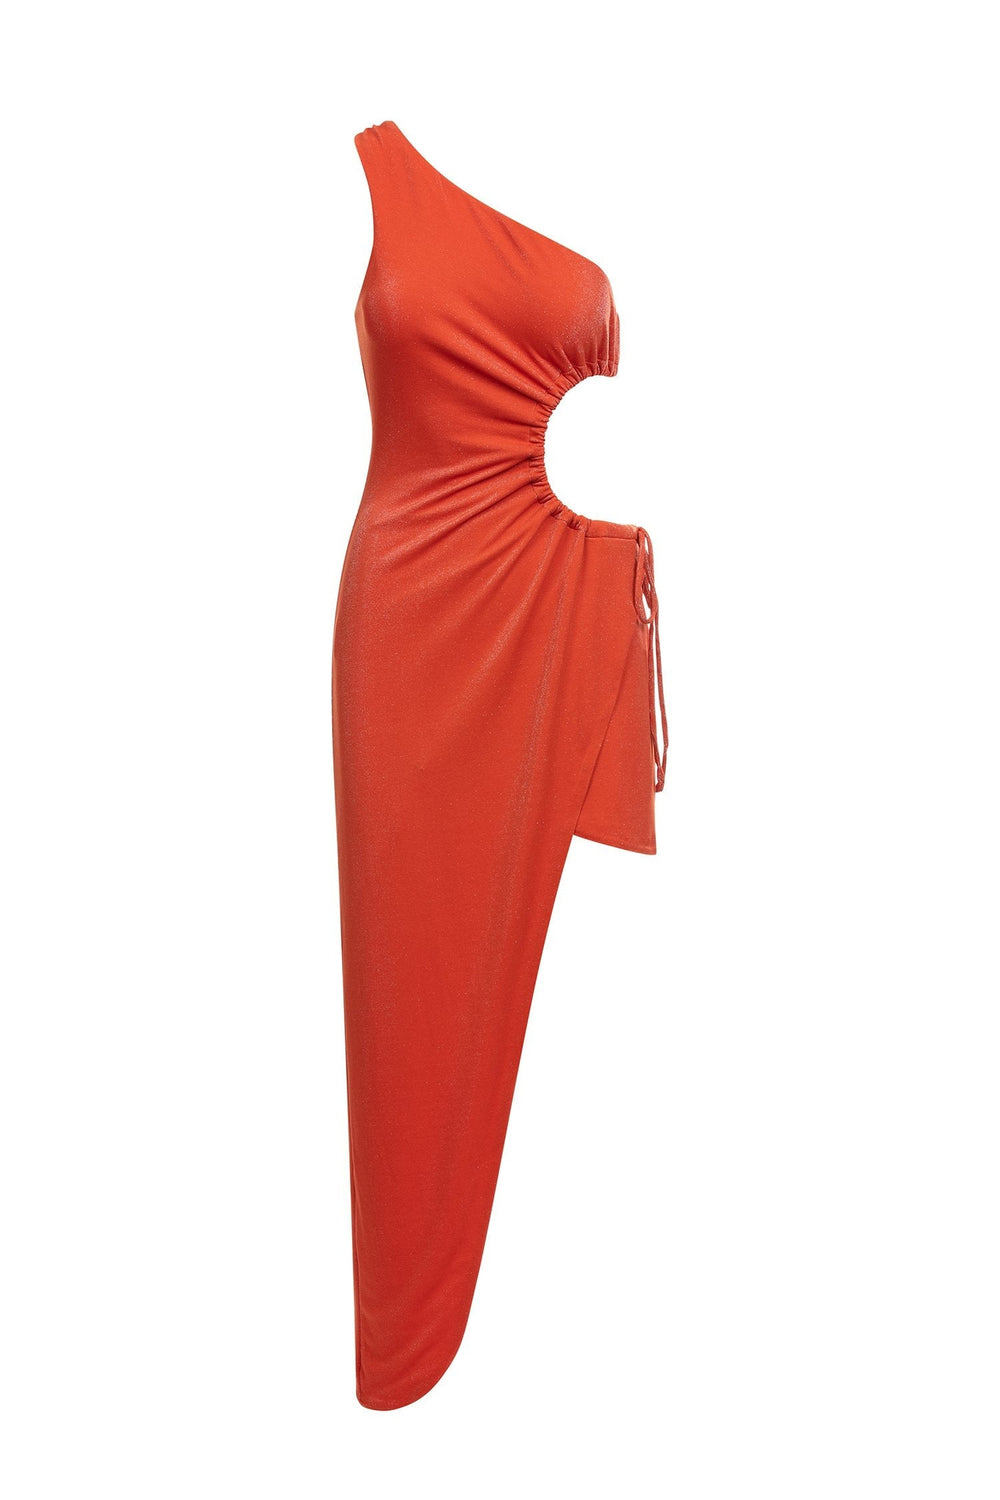 Antonia Dress - Shimmering Orange One Shoulder Midi Dress with Cut Out